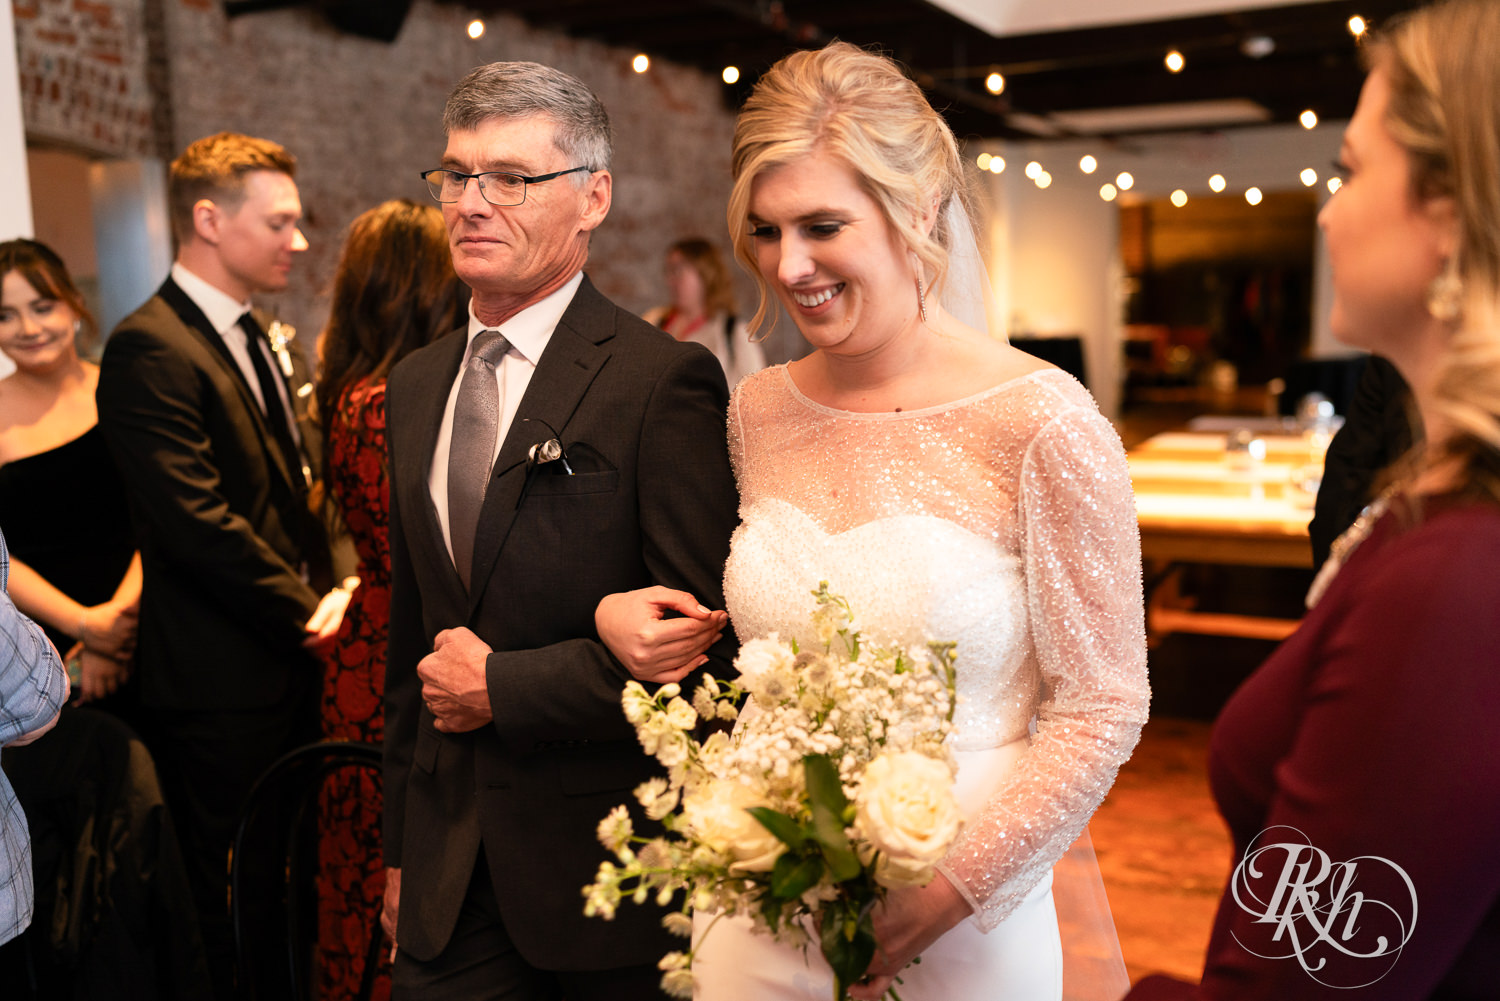 Bride walks down the aisle with dad during indoor wedding ceremony at Gatherings at Station 10 in Saint Paul, Minnesota.